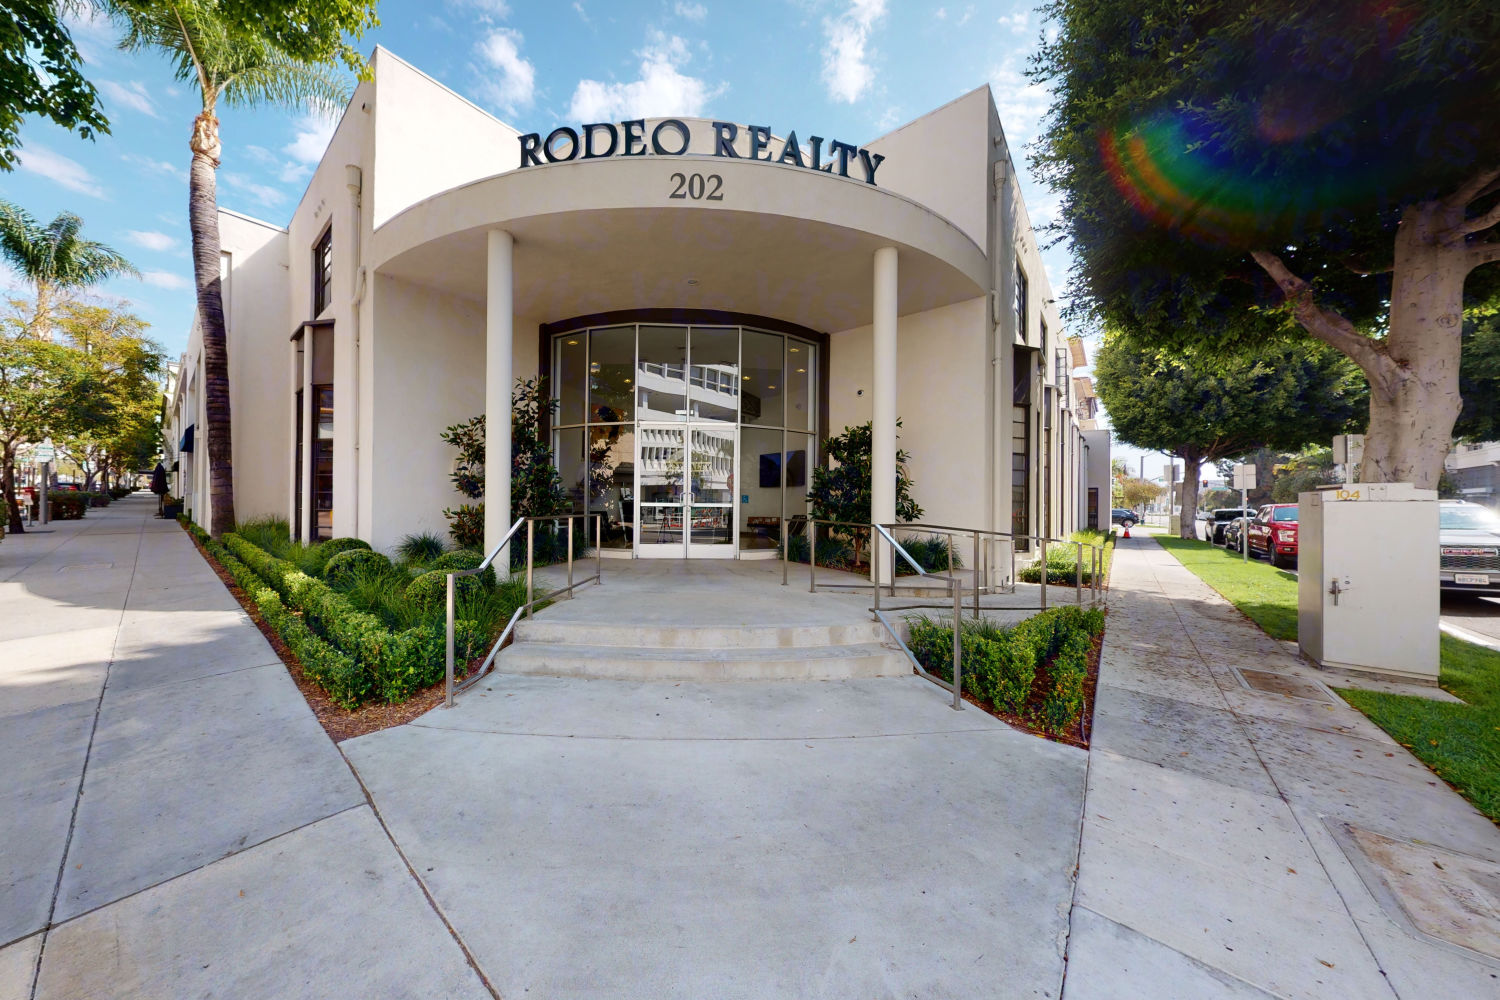 262 North Rodeo Drive - 262 N Rodeo Dr, Beverly Hills, CA 90210 